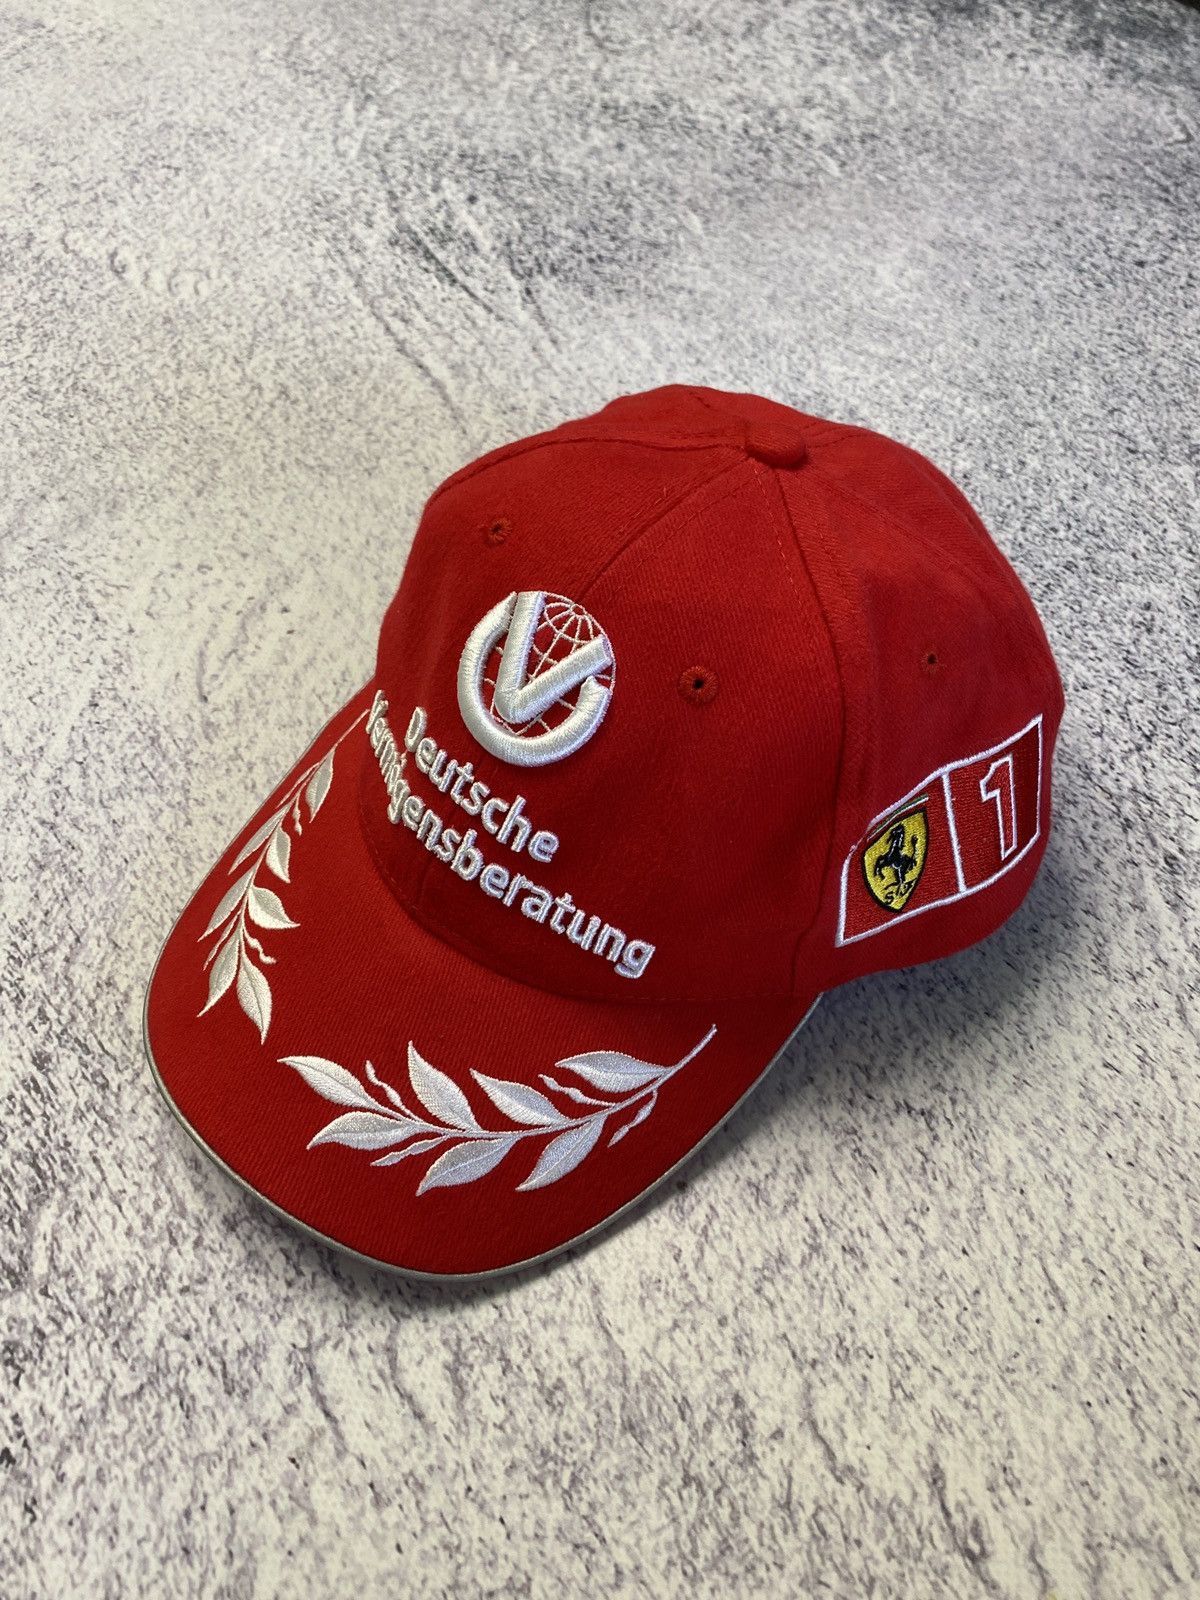 Toyota racing hat, Men's Fashion, Watches & Accessories, Caps